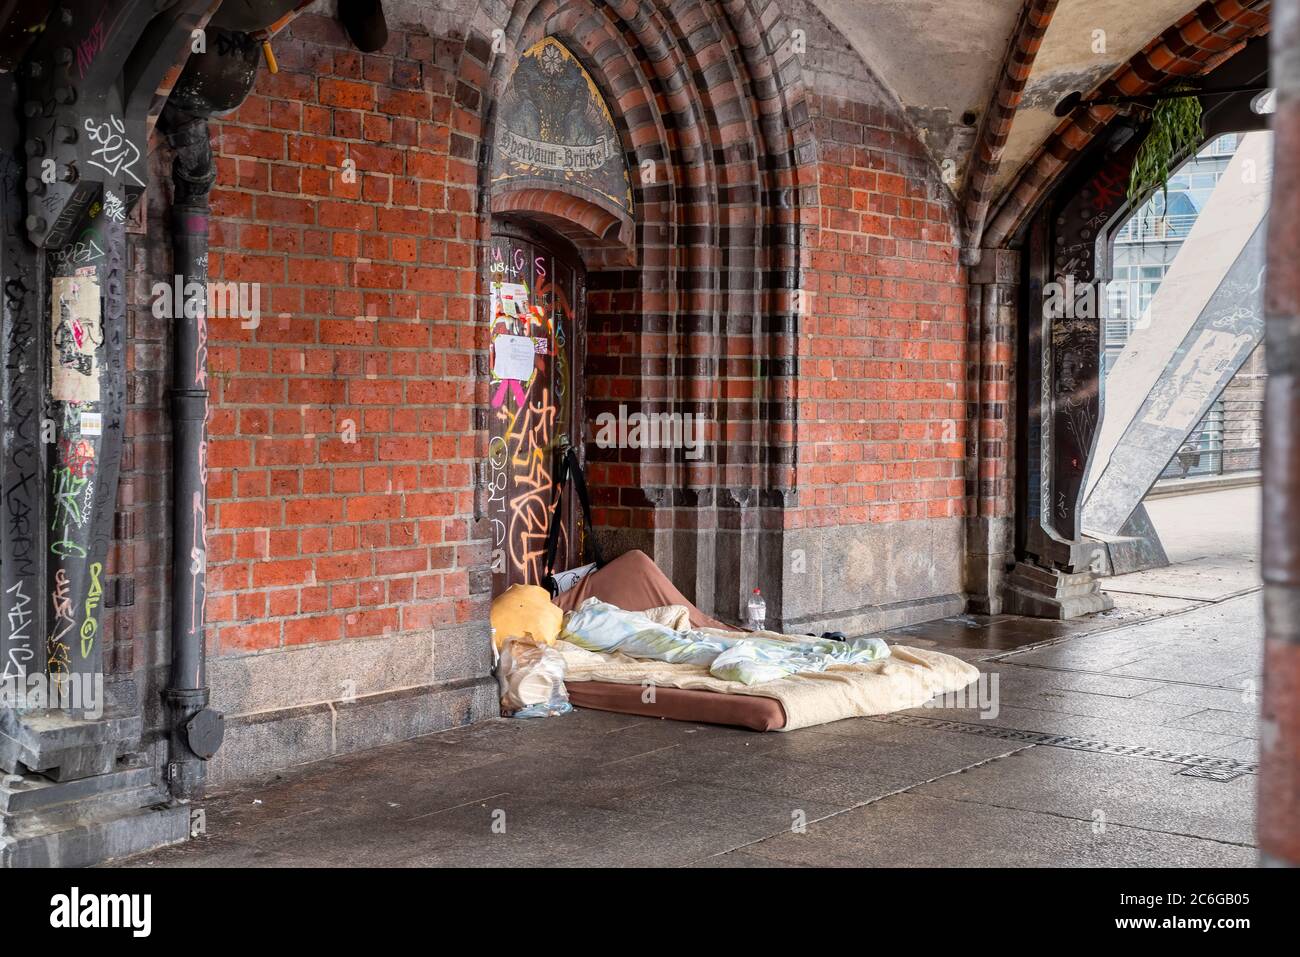 Berlin, Germany, 06/14/2020: Bed of a homeless person in the passage of the Oberbaumbruecke in Berlin, Germany Stock Photo